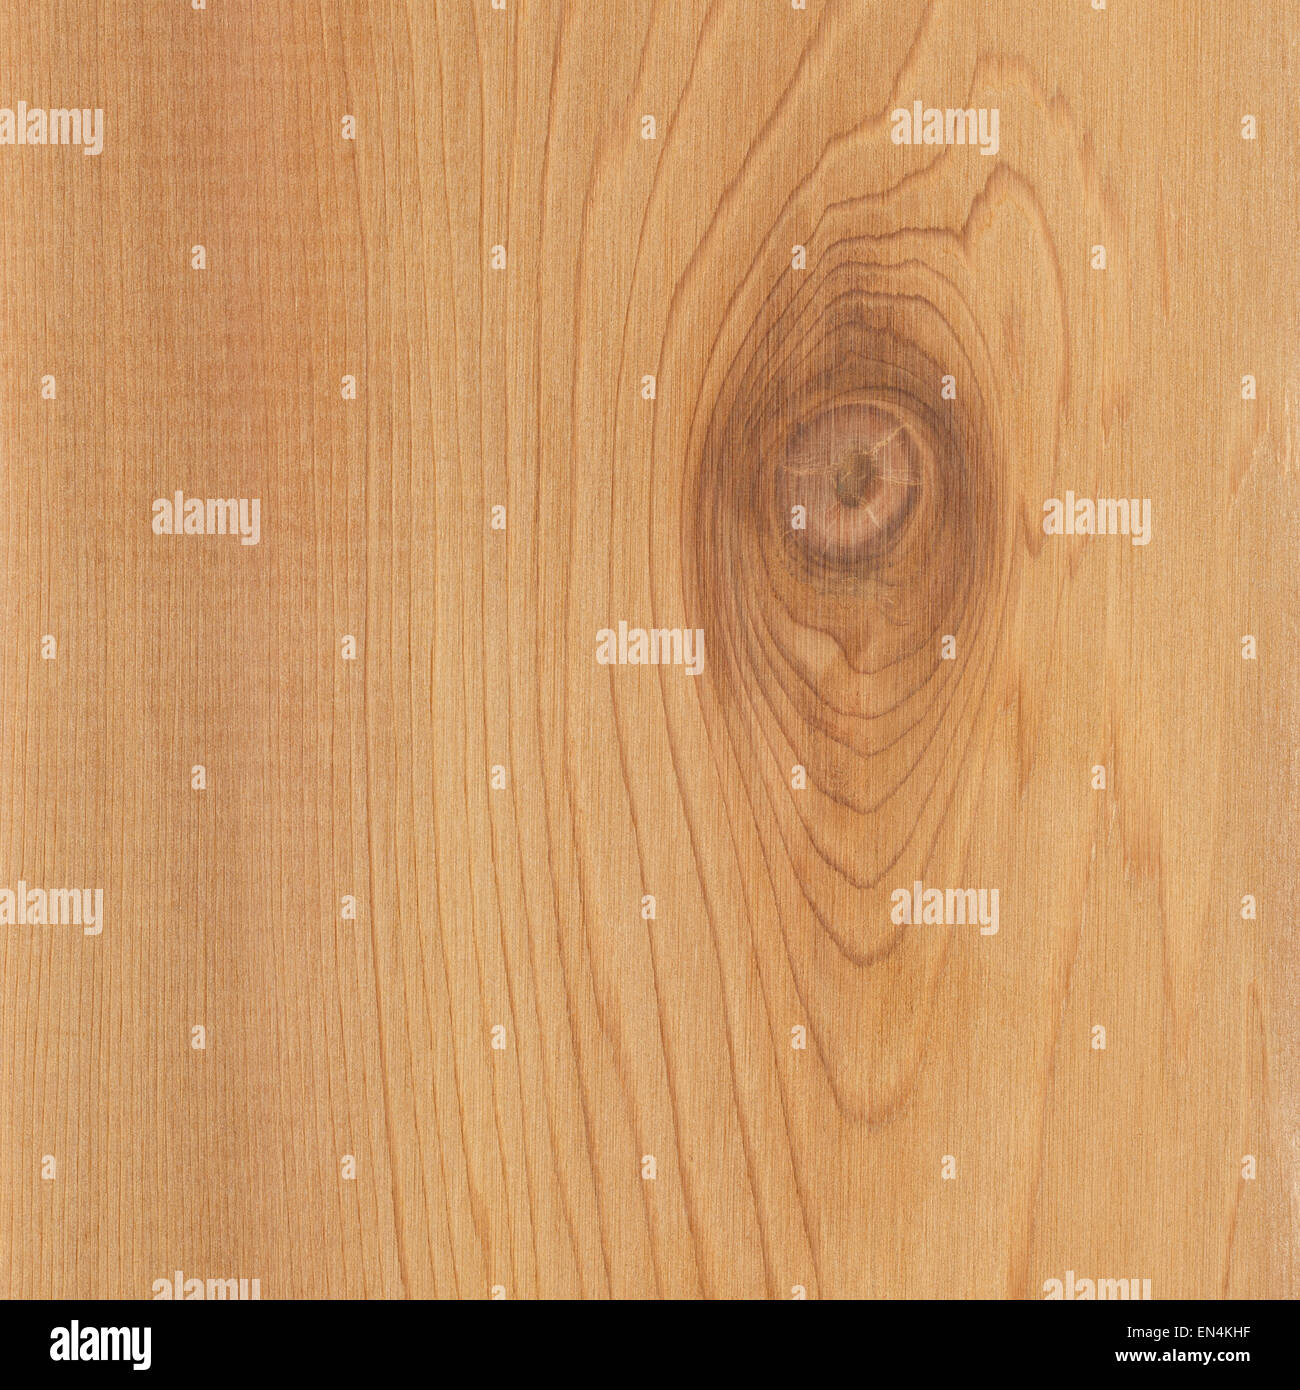 Natural Brown Wood Grain Textured Background with Tree knot. Stock Photo